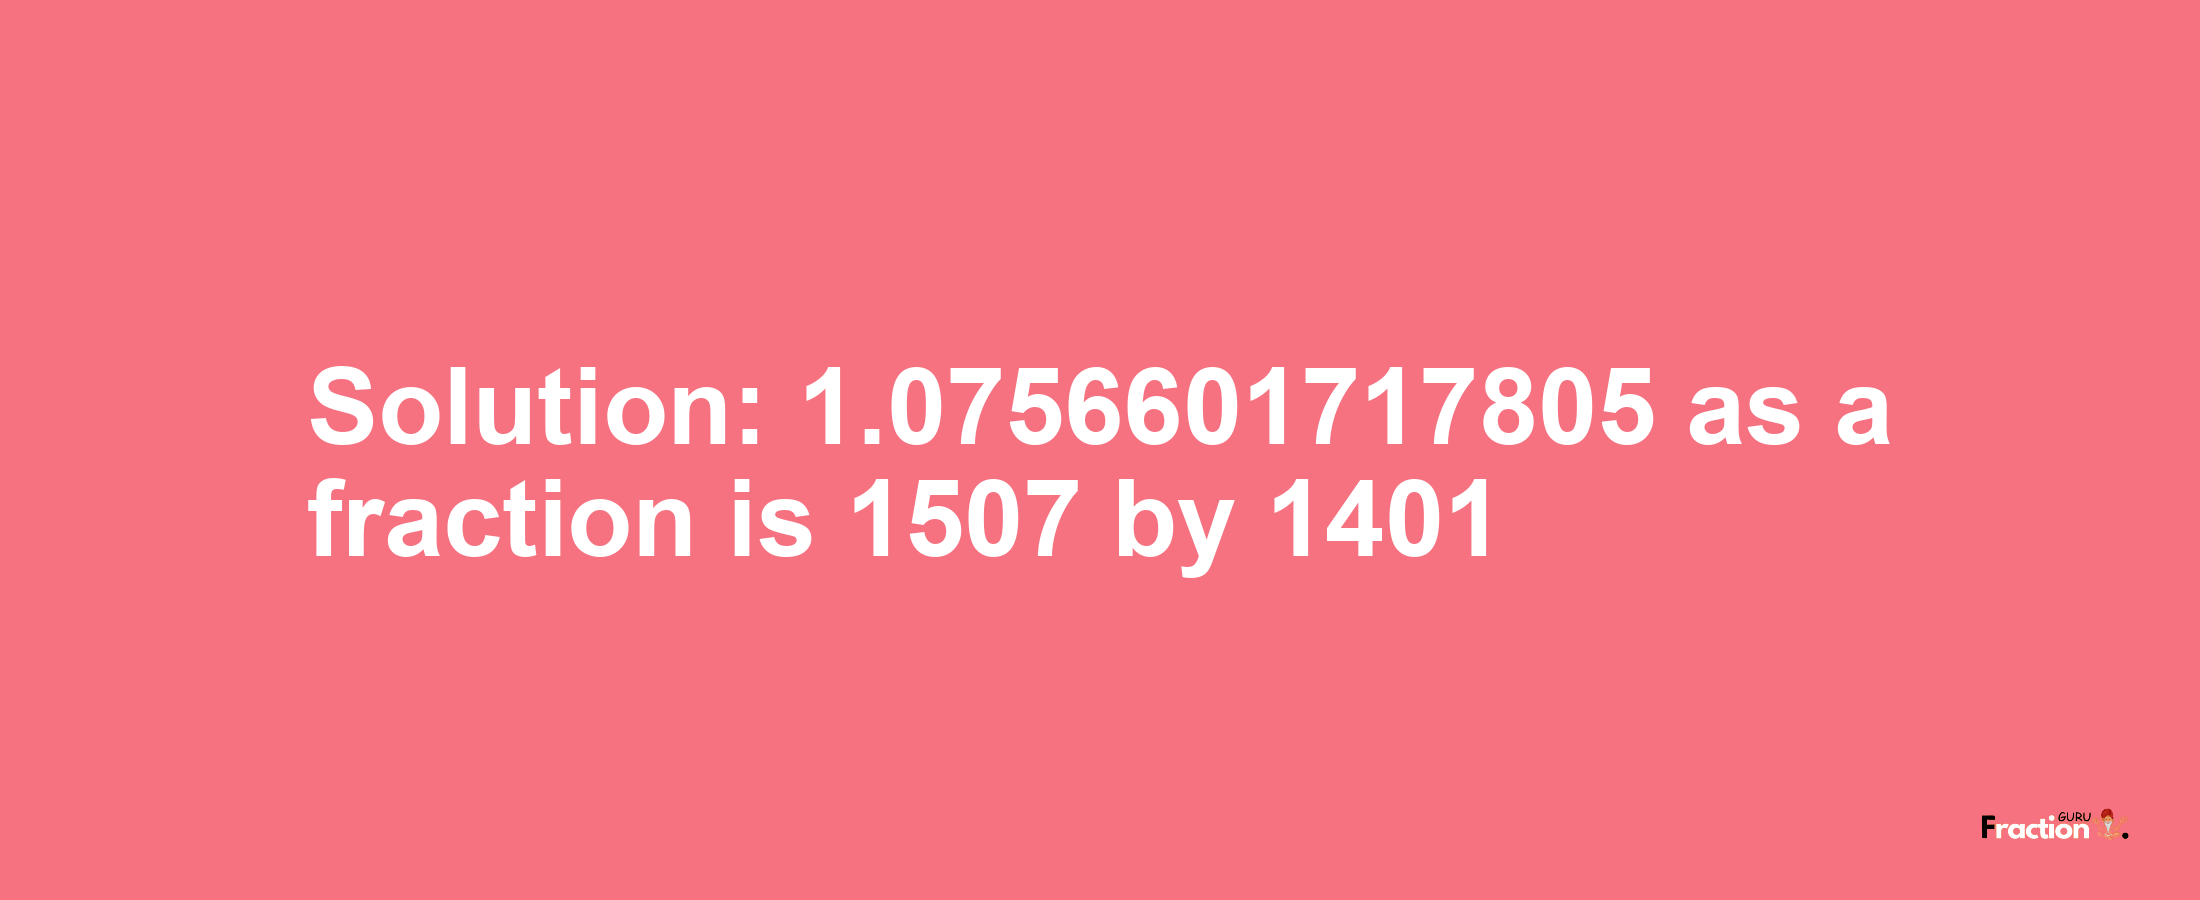 Solution:1.0756601717805 as a fraction is 1507/1401